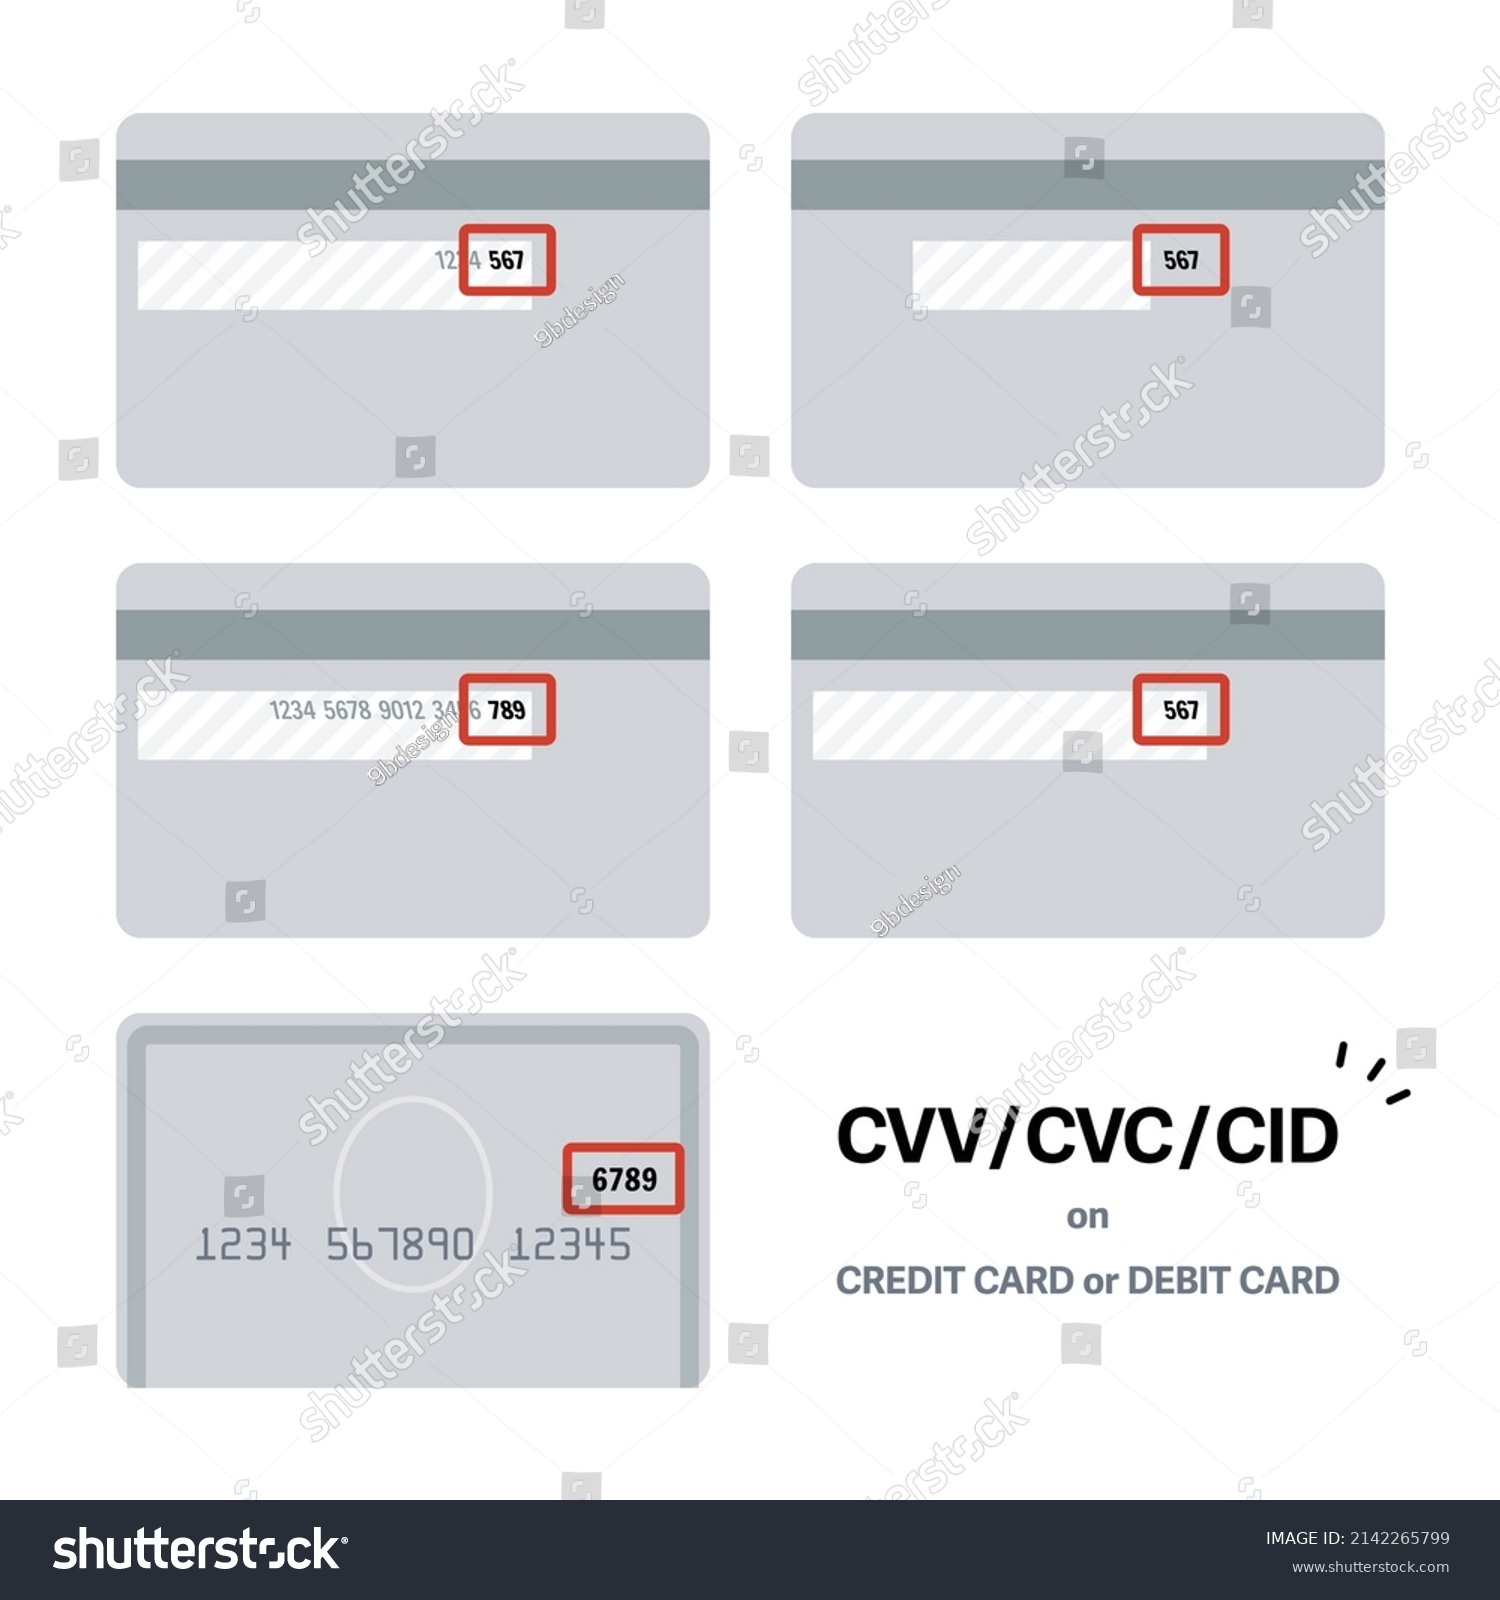 Where to find CVV CVC CID (Card Verification Value Numbers) on credit and debit cards Set #2142265799